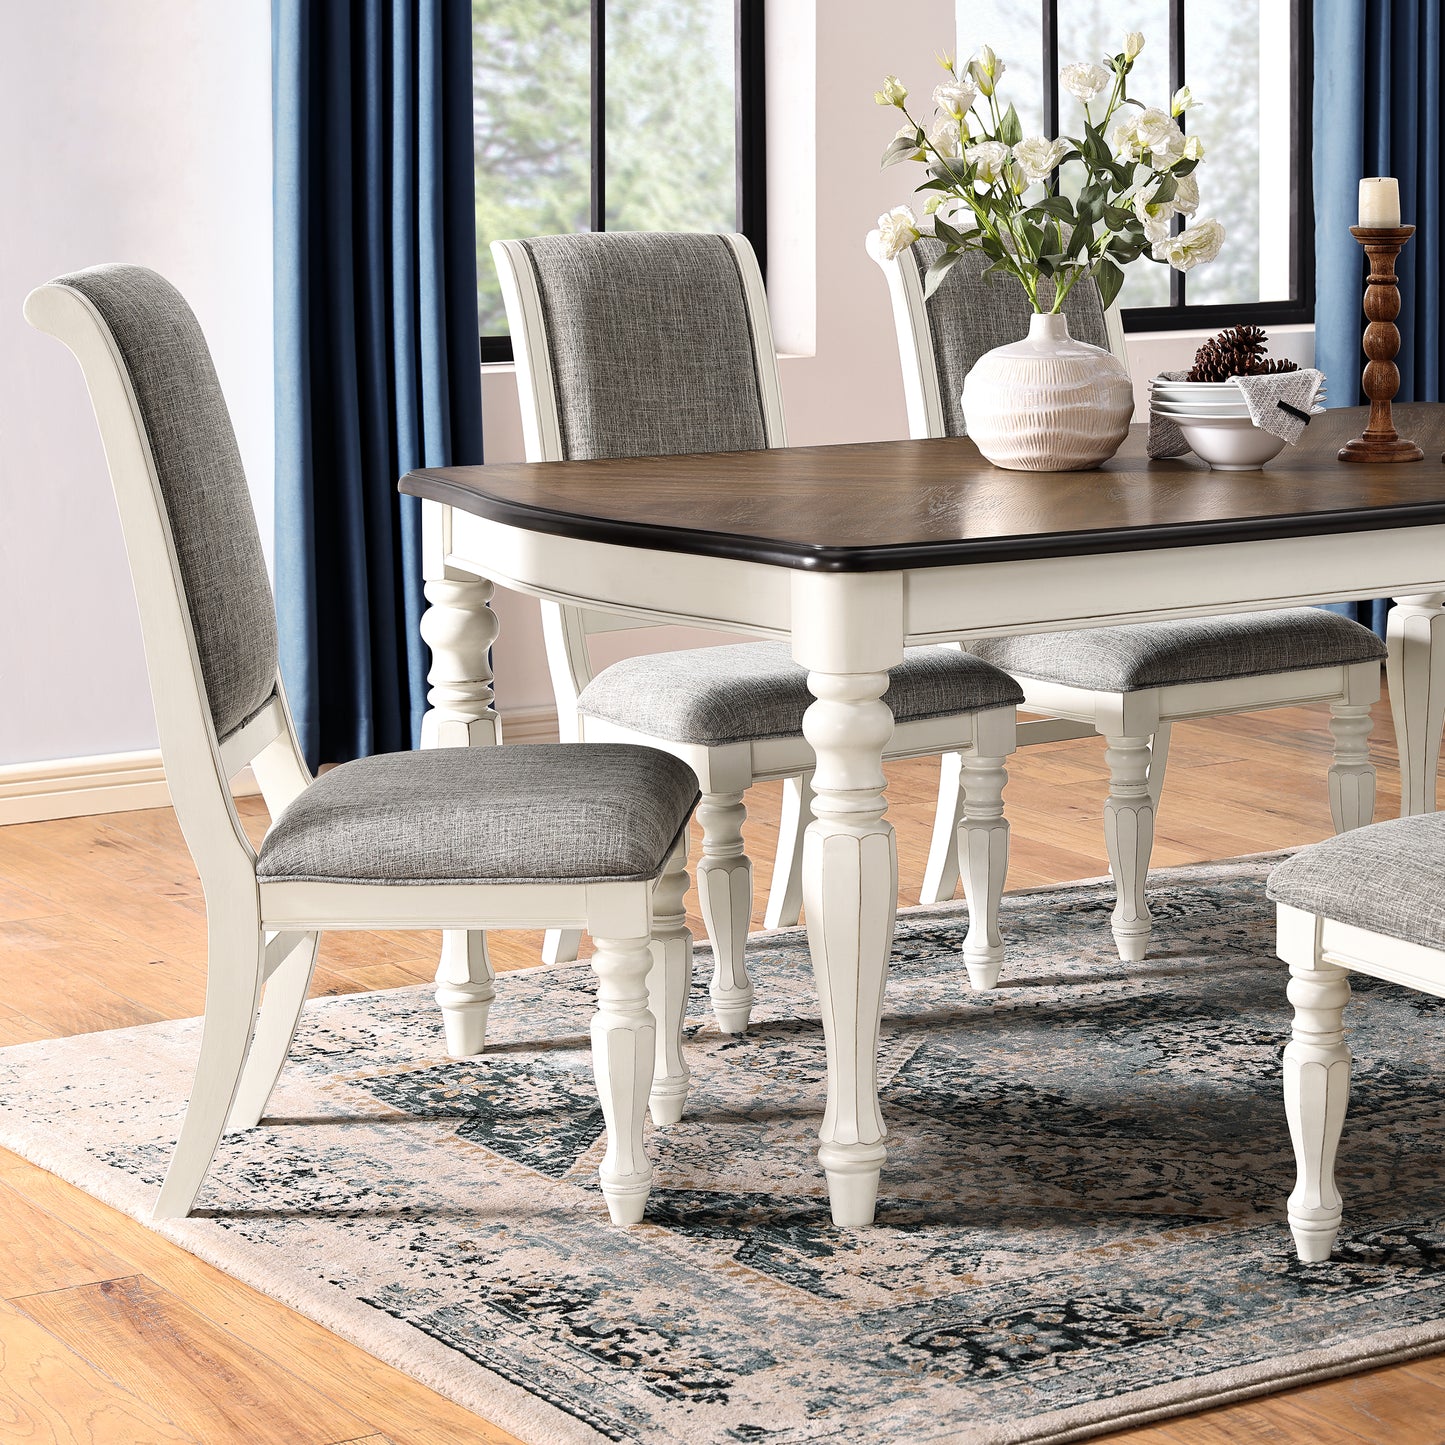 Roundhill Furniture Belleza French Country 5-Piece Dining Set in Antique White and Weathered Oak Finish